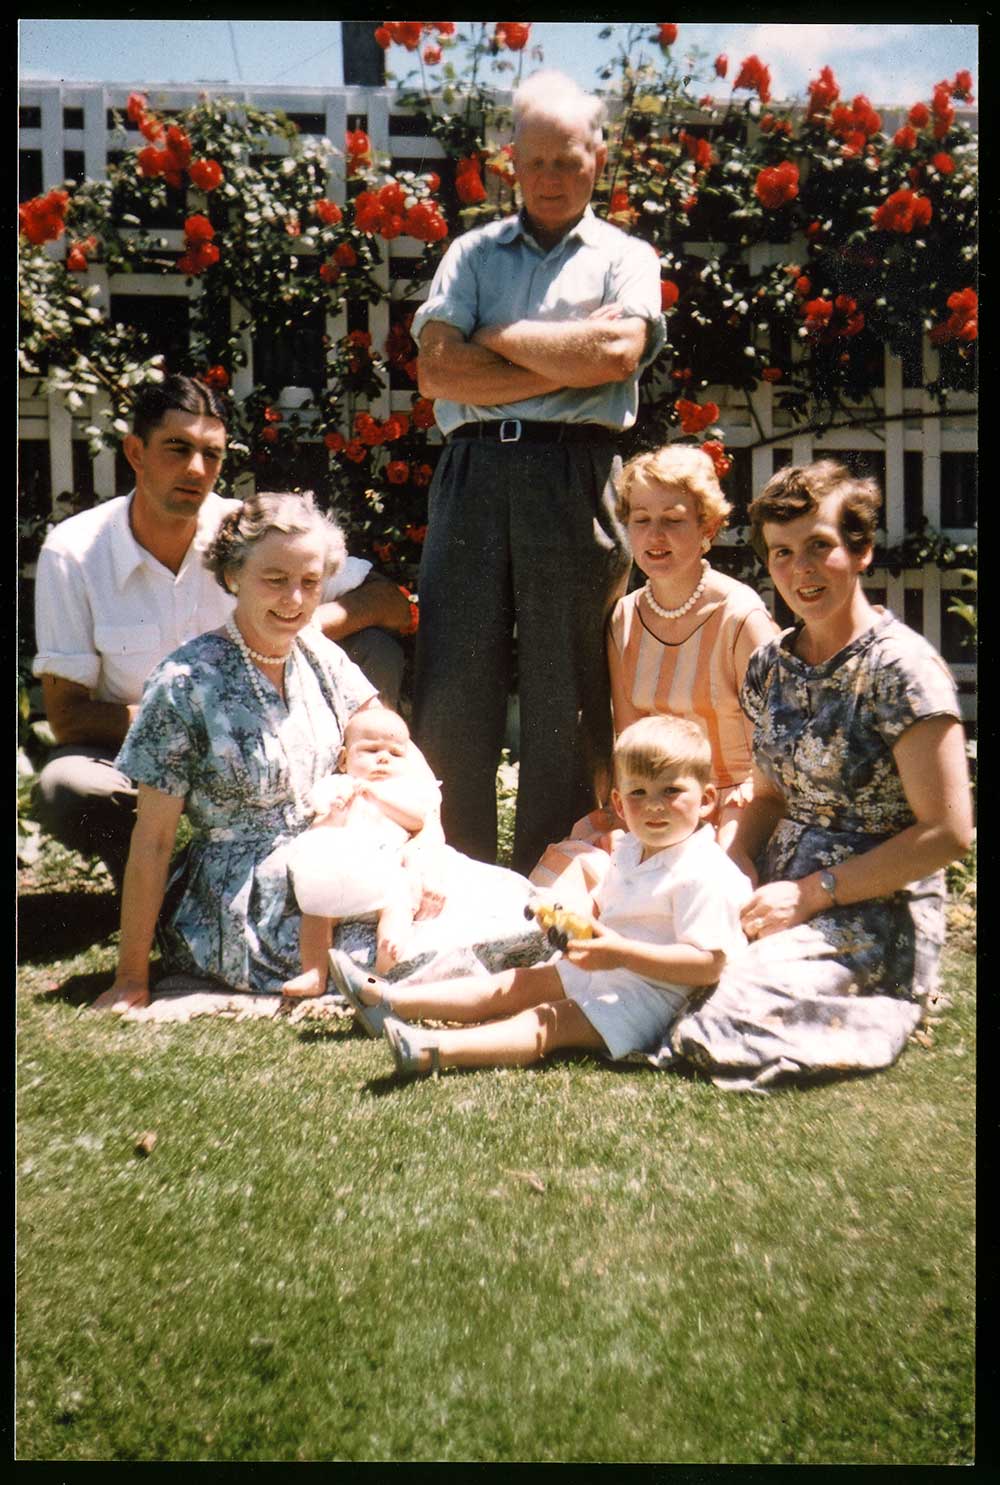 Archibald Shaw (centre) and family later in life